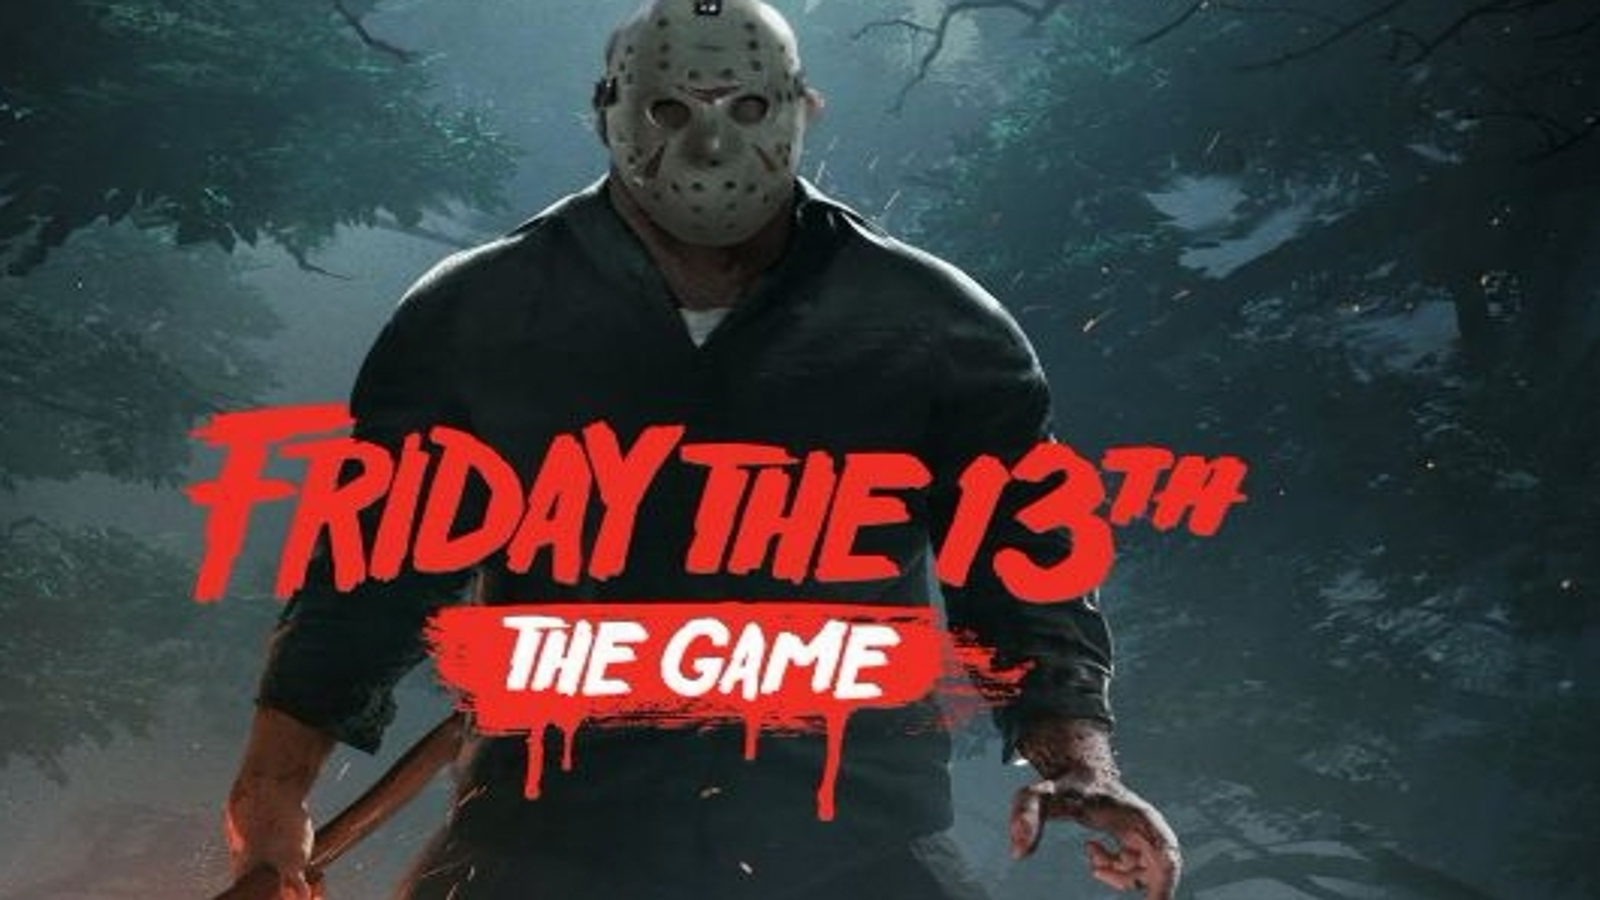 October's PlayStation Plus games include Friday the 13th and Laser League